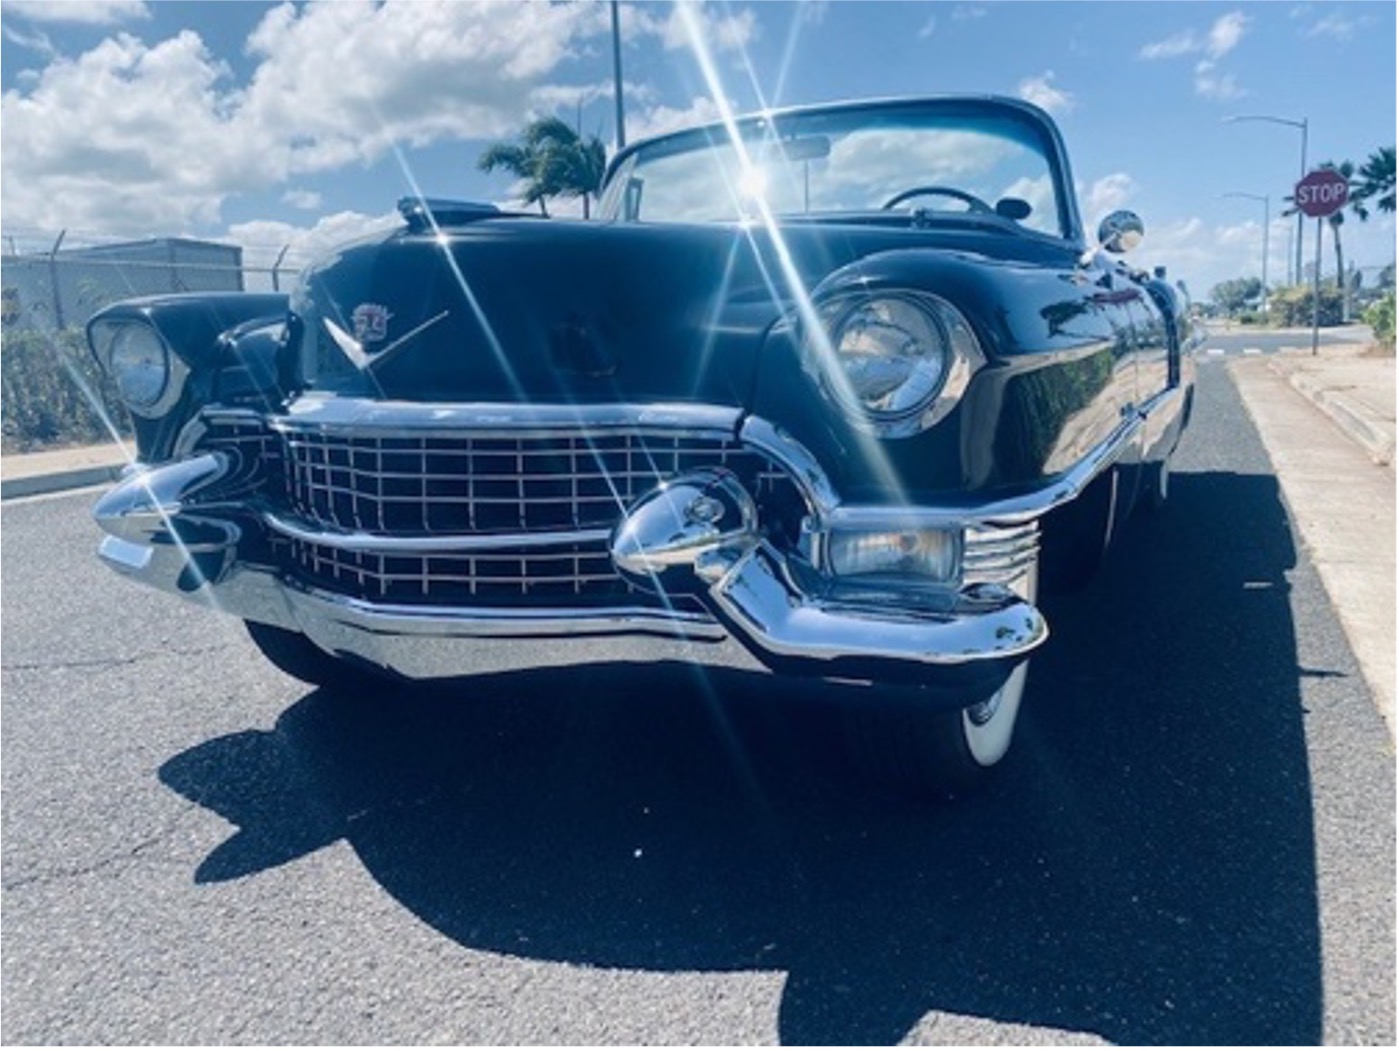 Beautifully Restored 1955 Cadillac is Going to Auction